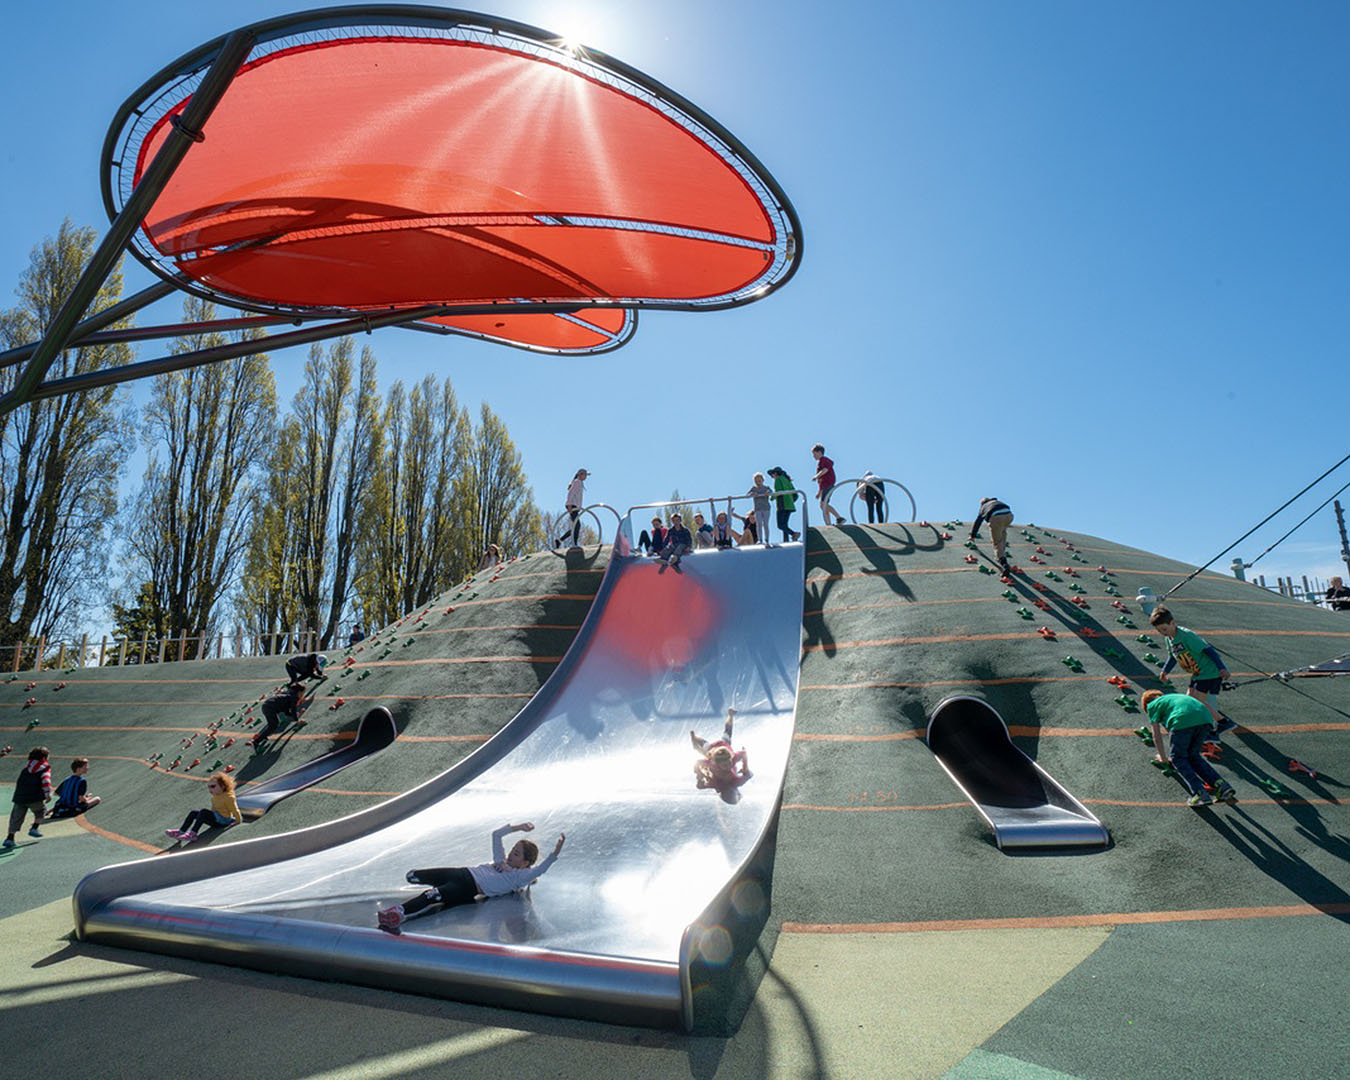 People enjoy the slide at Margaret Mahy Playground in Christchurch, one of 50 of the best things to do.